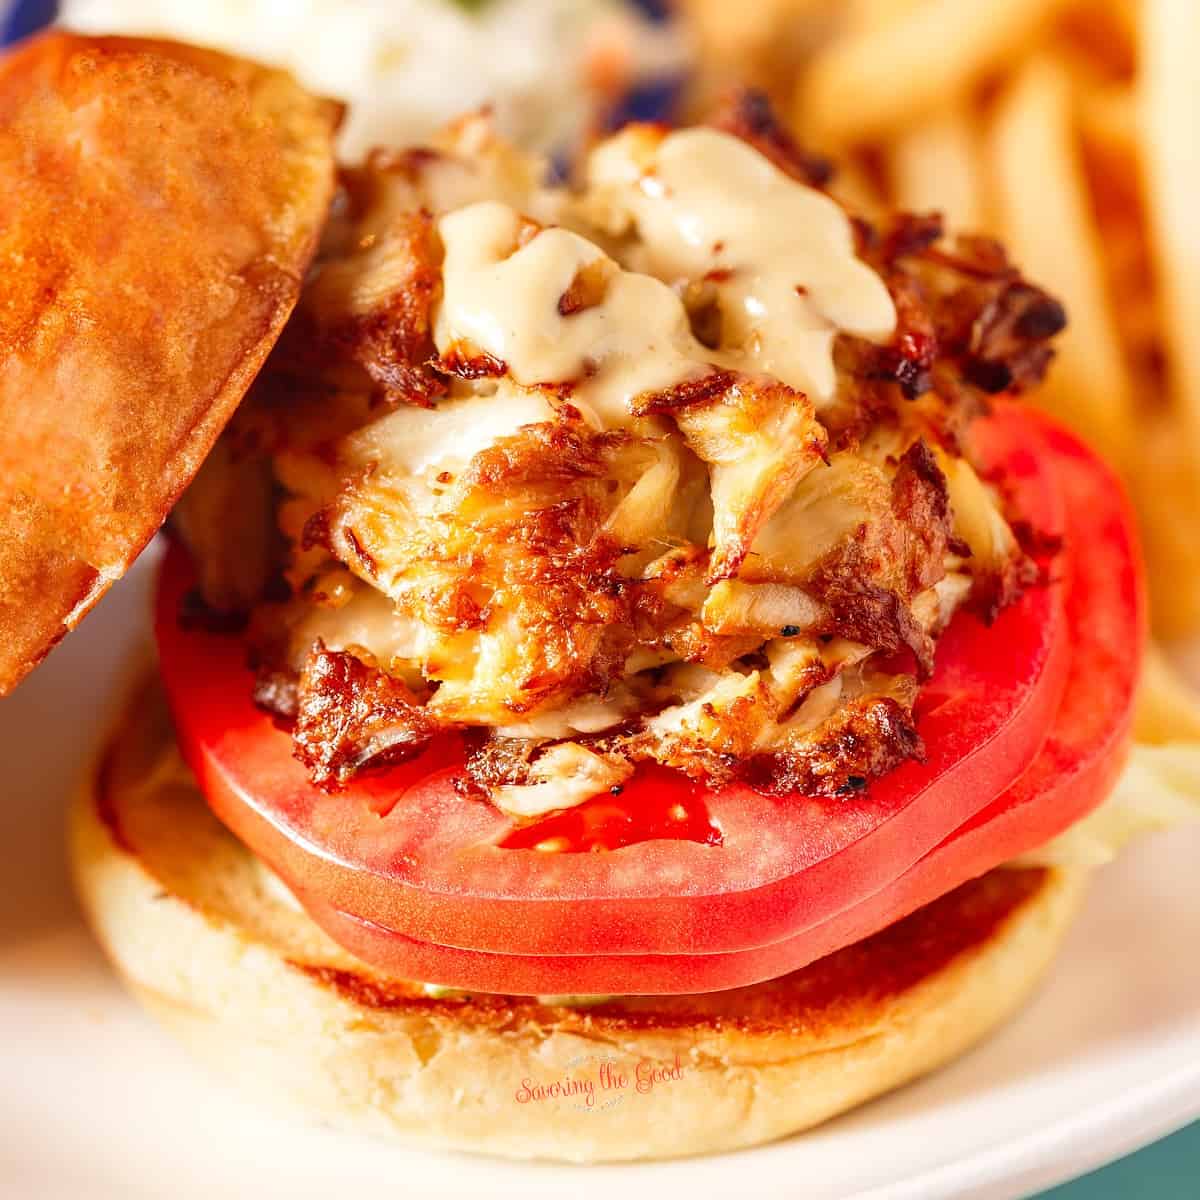 A crab cake burger on a plate with french fries.